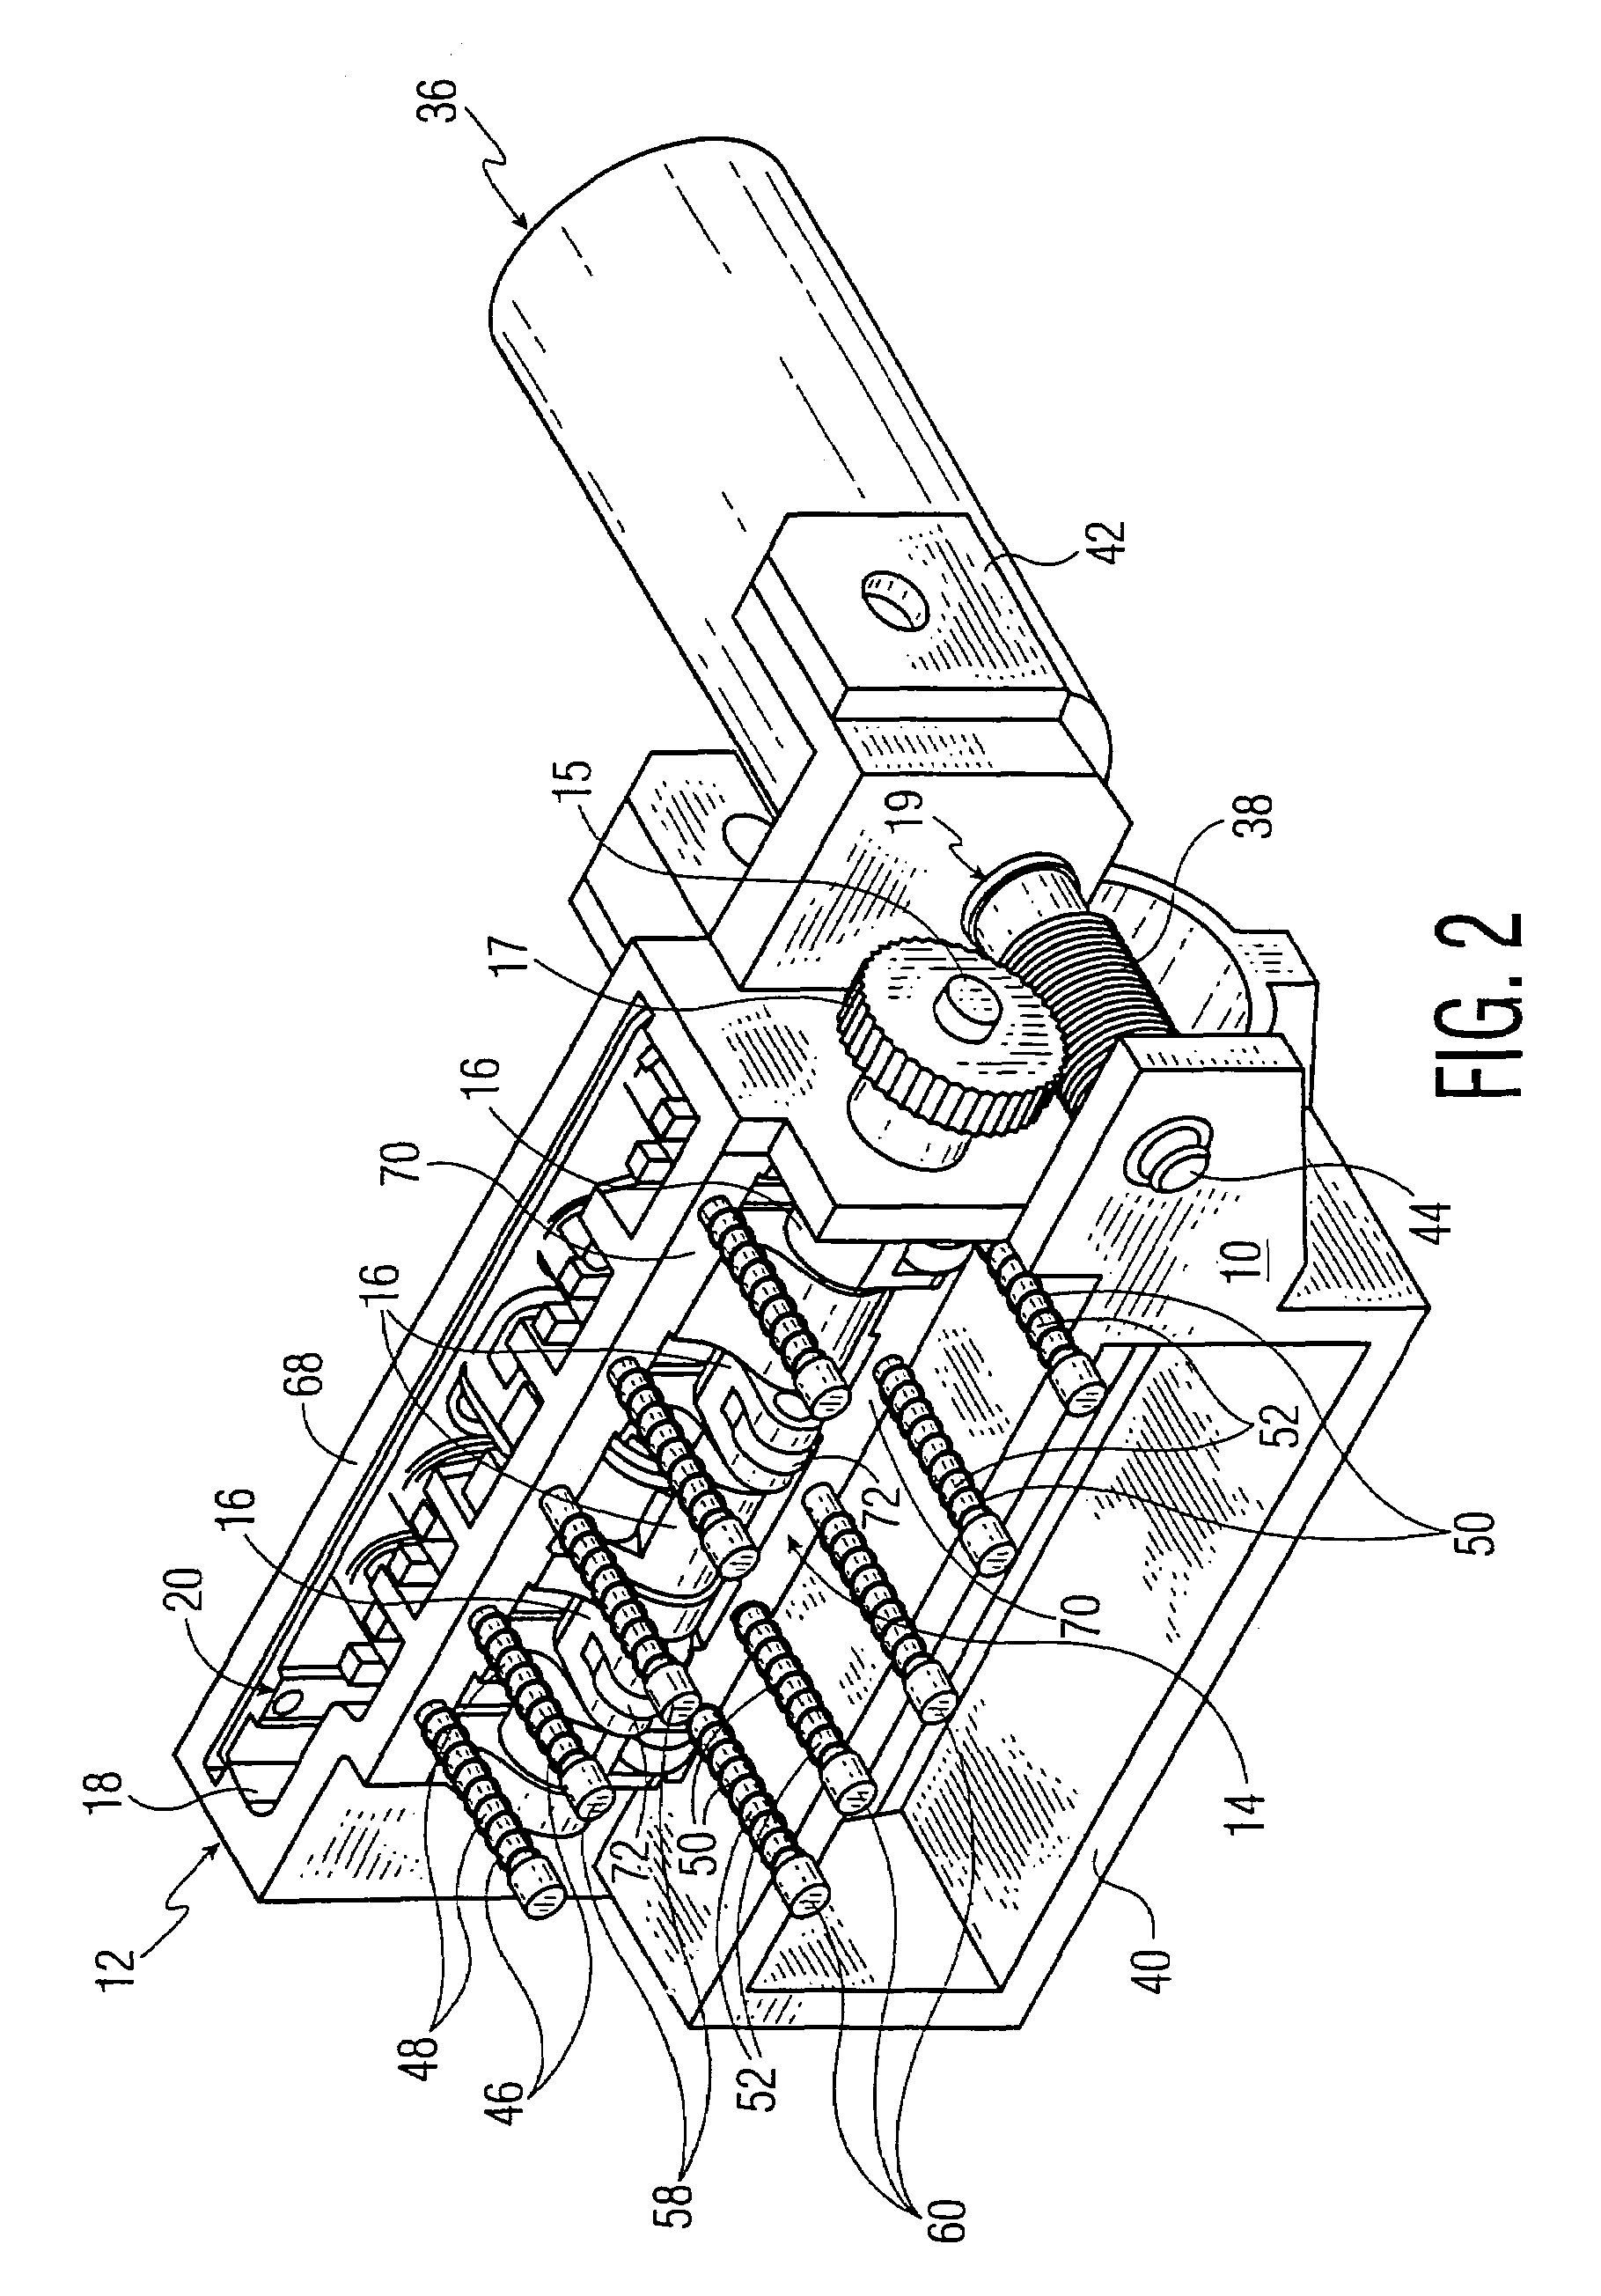 Automated ampoule breaking device